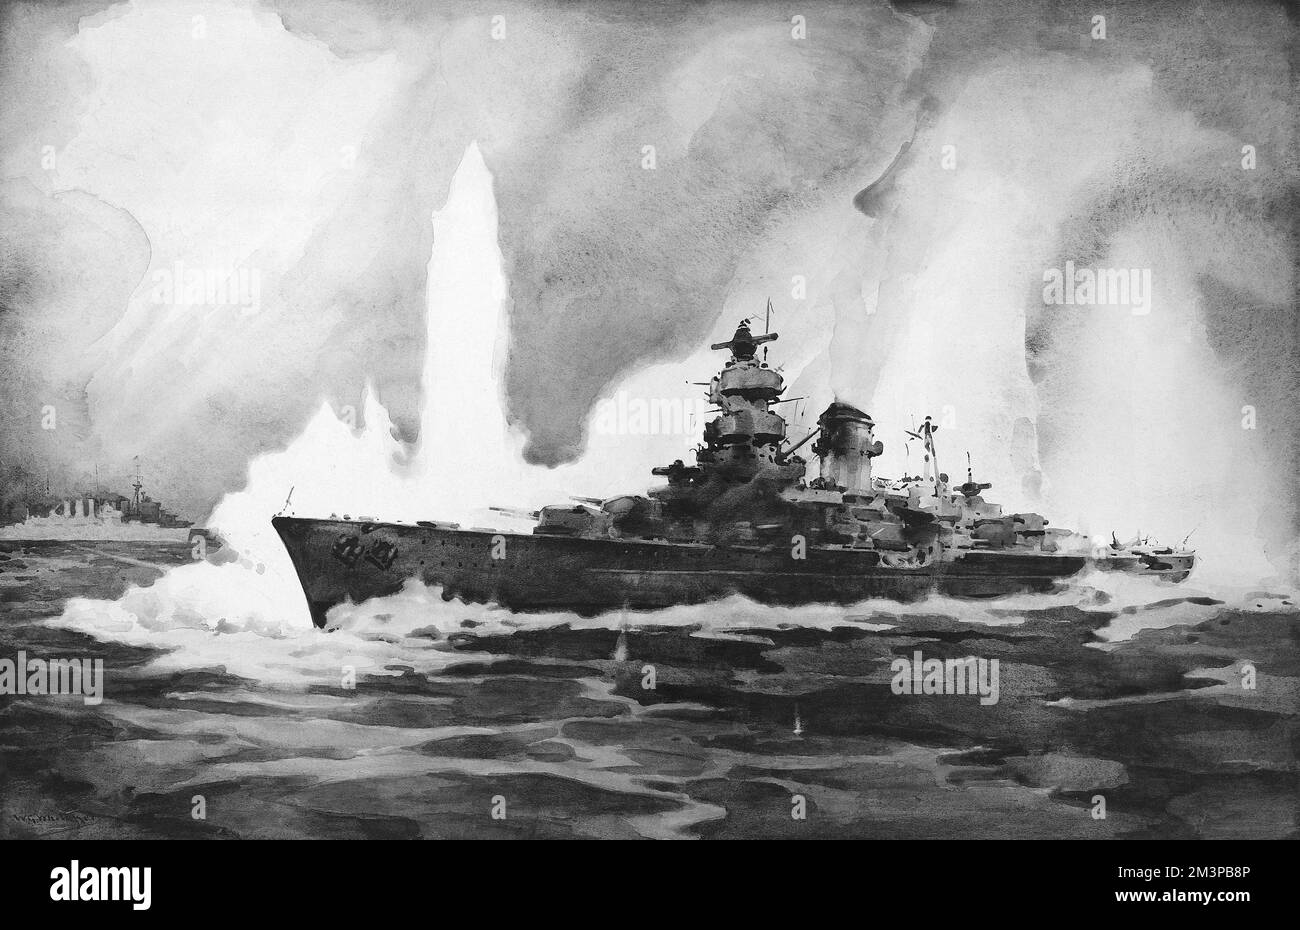 The German battleship, Bismarck.  The ship was sunk on 27 May 1941 in battle with British naval forces.      Date: 1941 Stock Photo